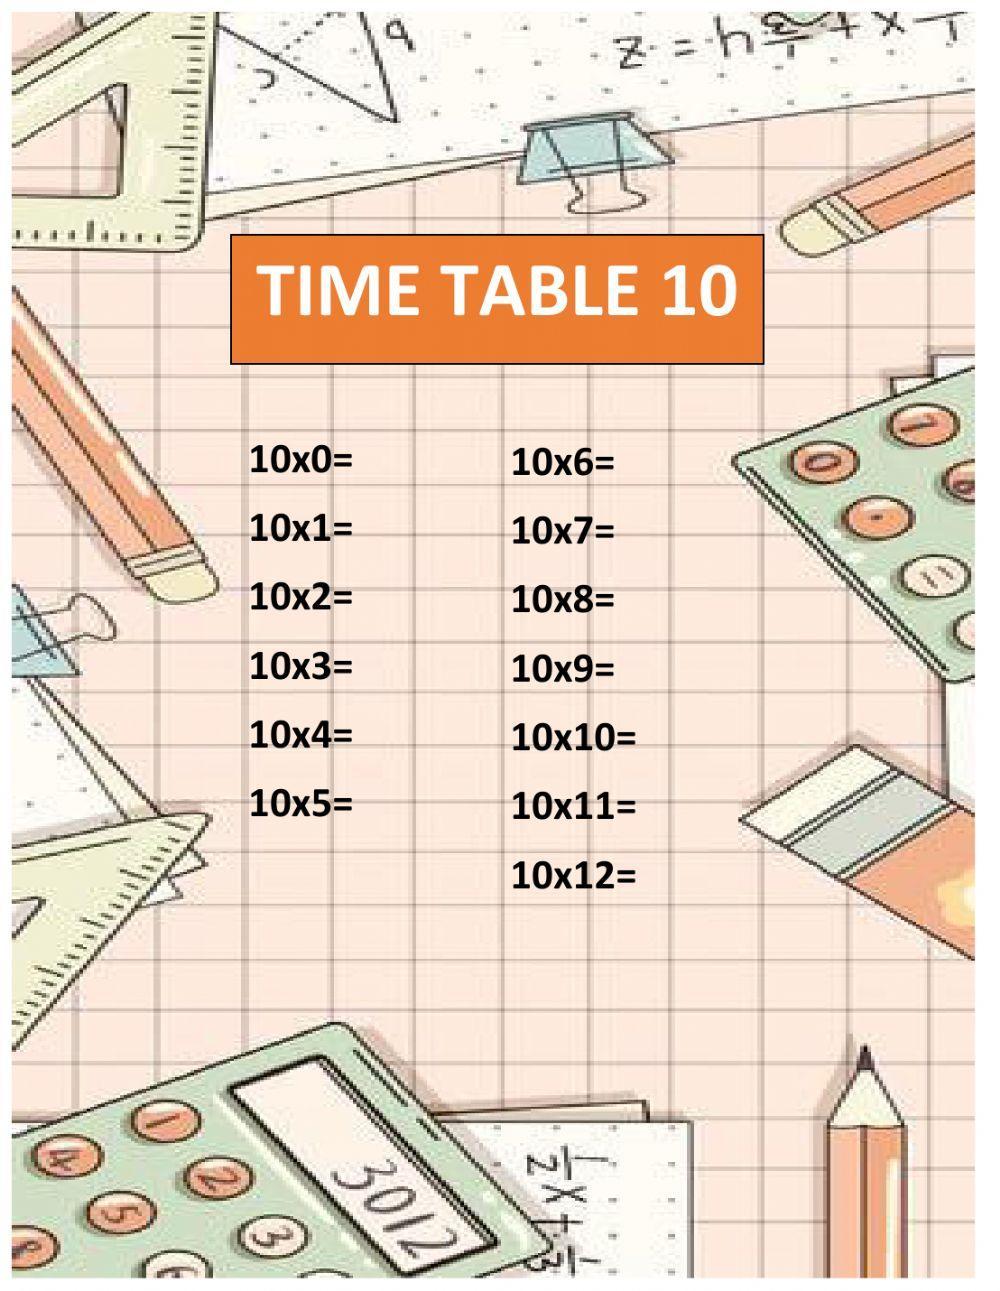 Time table 10